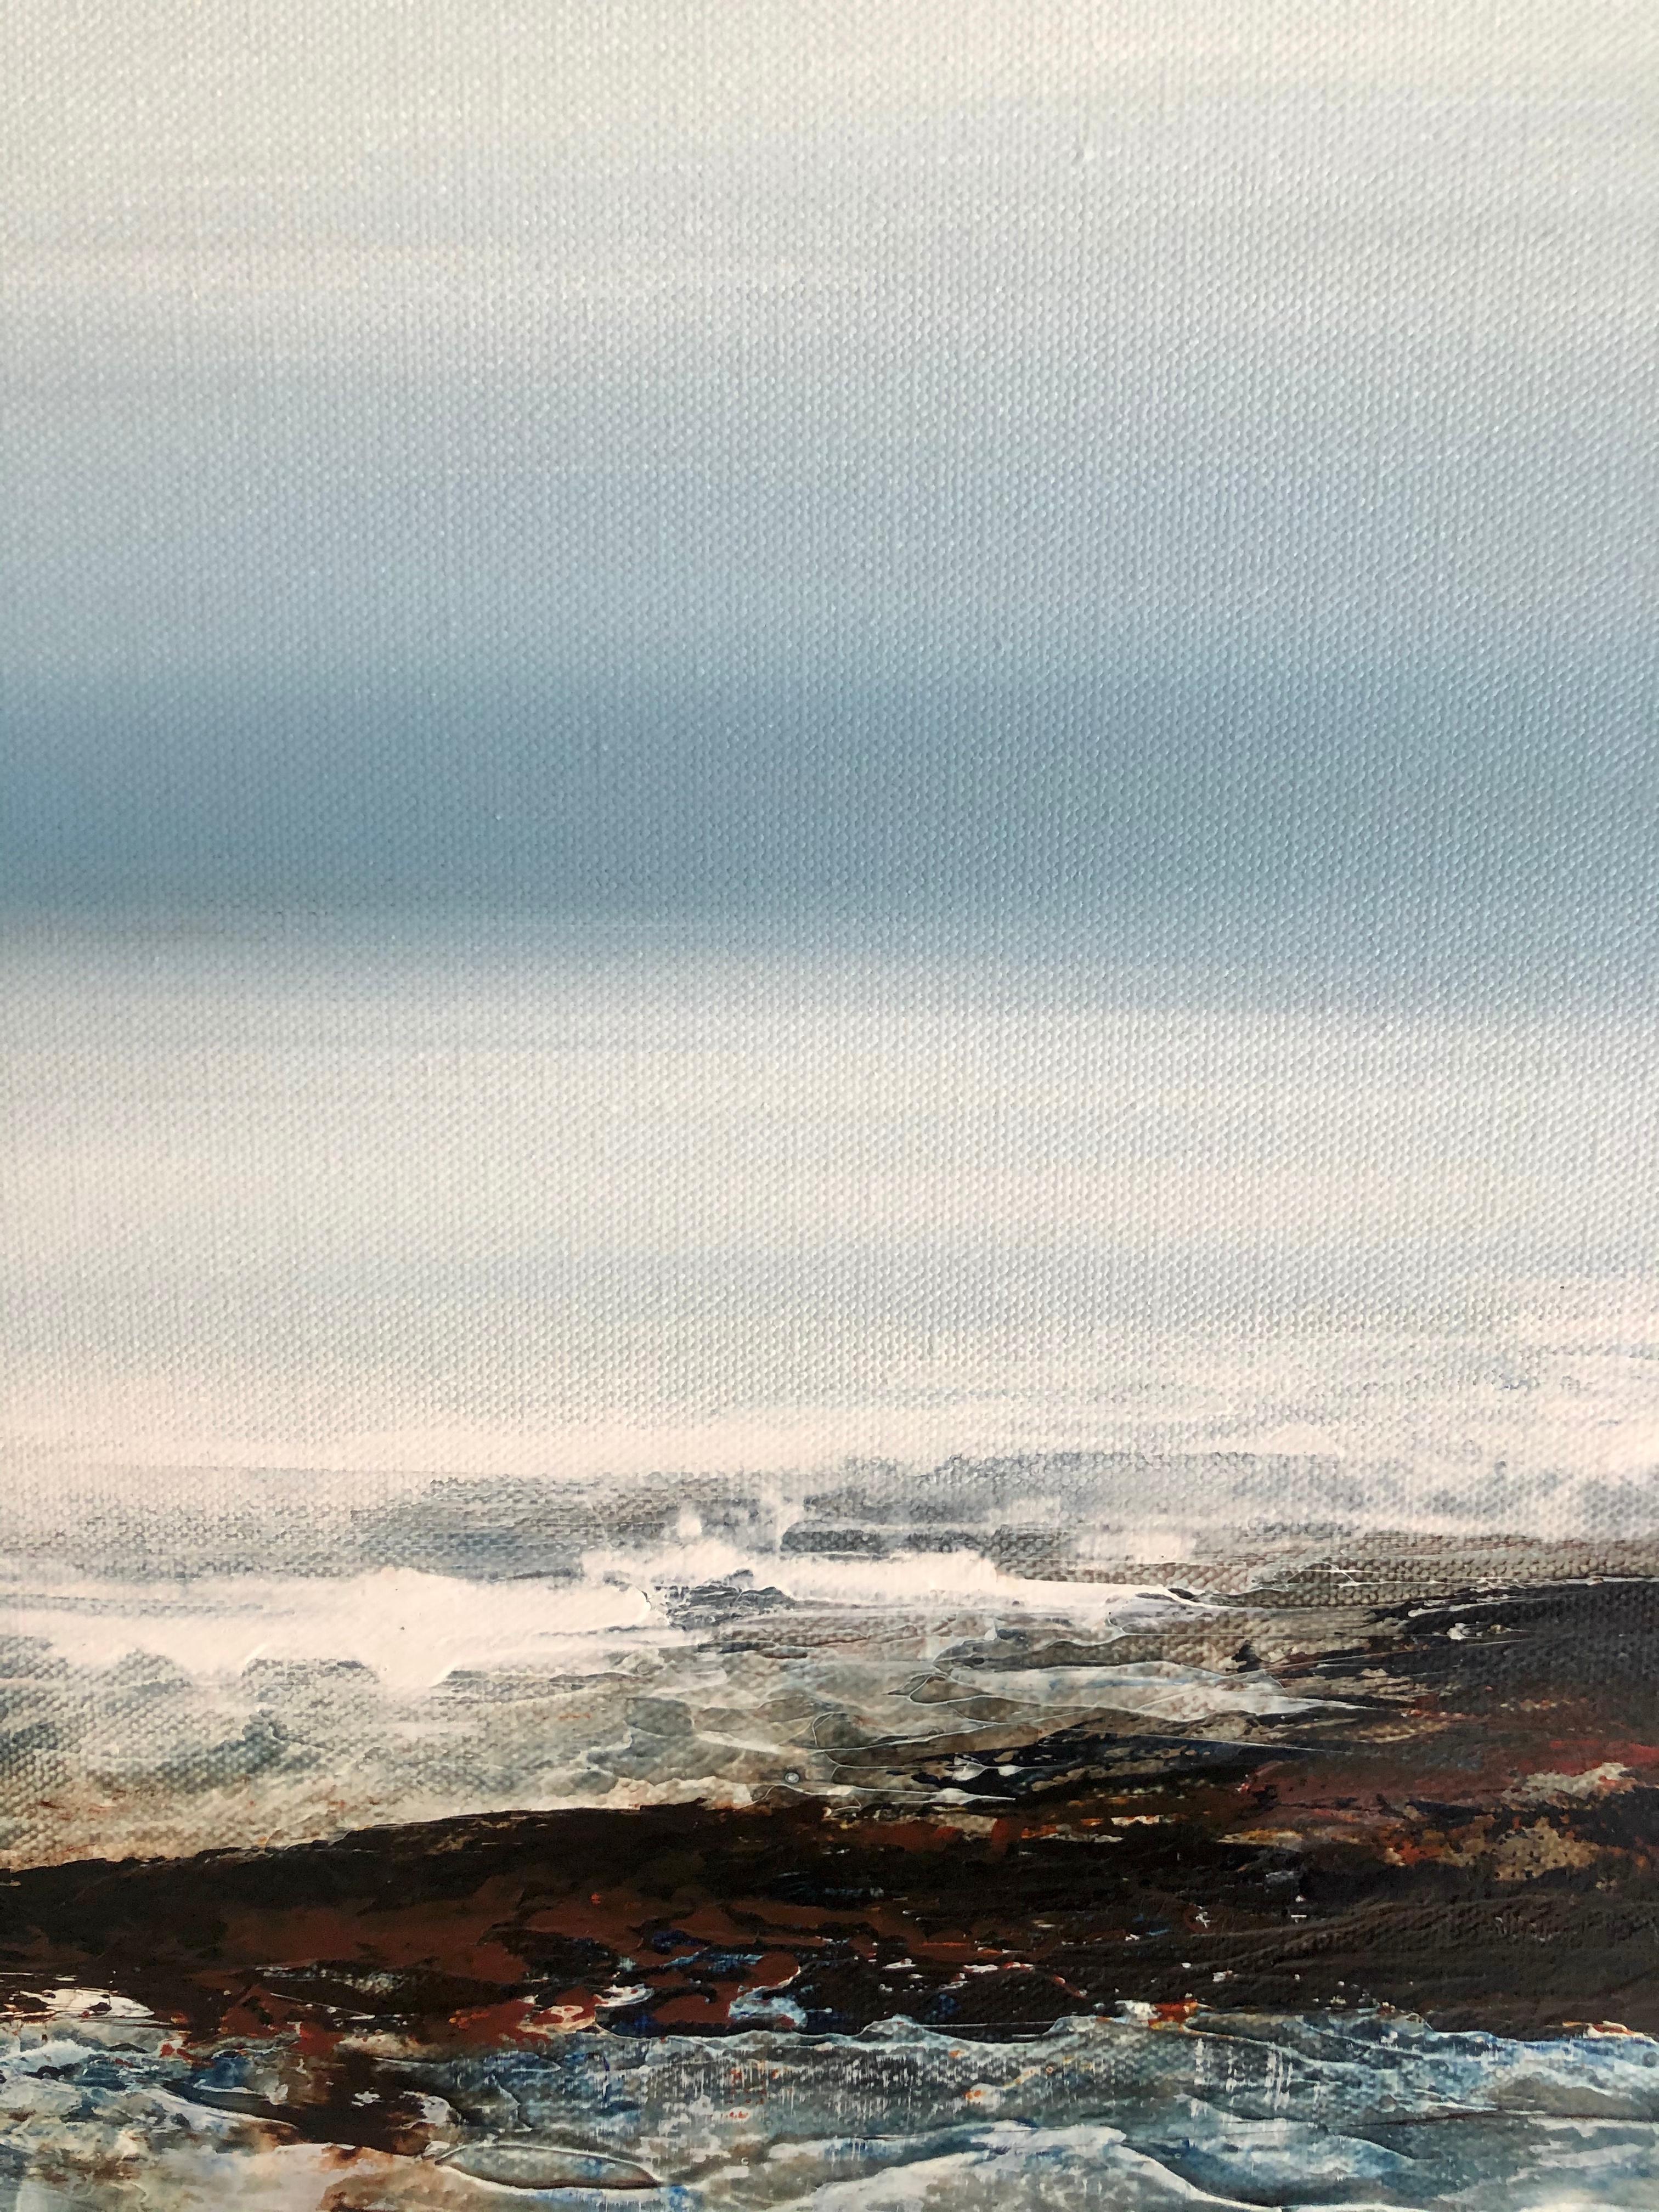 Light on the Water - landscape seascape ocean acrylic Painting Contemporary art - Gray Landscape Painting by Leila Godden UA